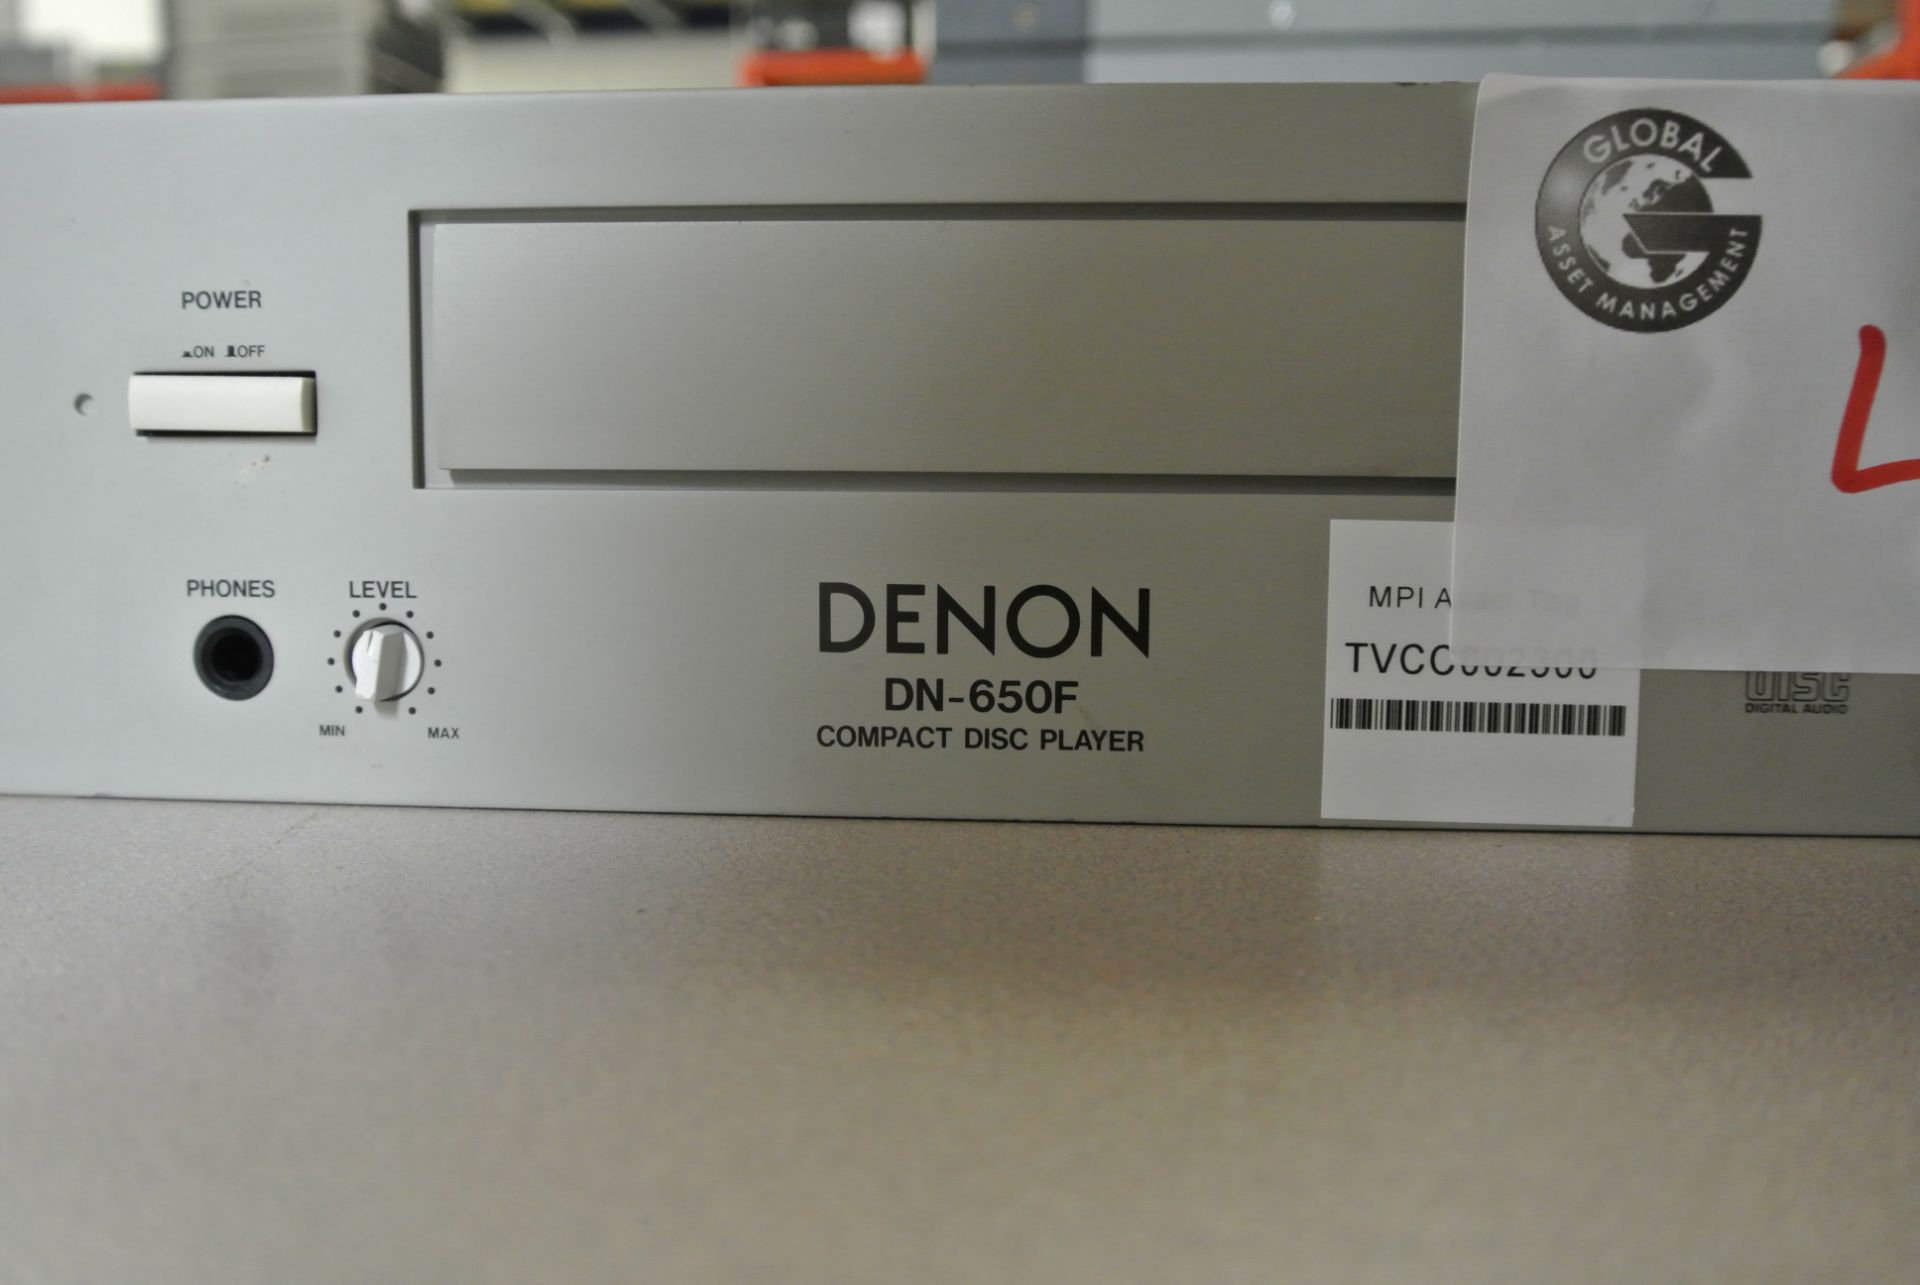 DENON DN-650F Compact Disc Player - 2U 19' Rack Mount - Image 2 of 4